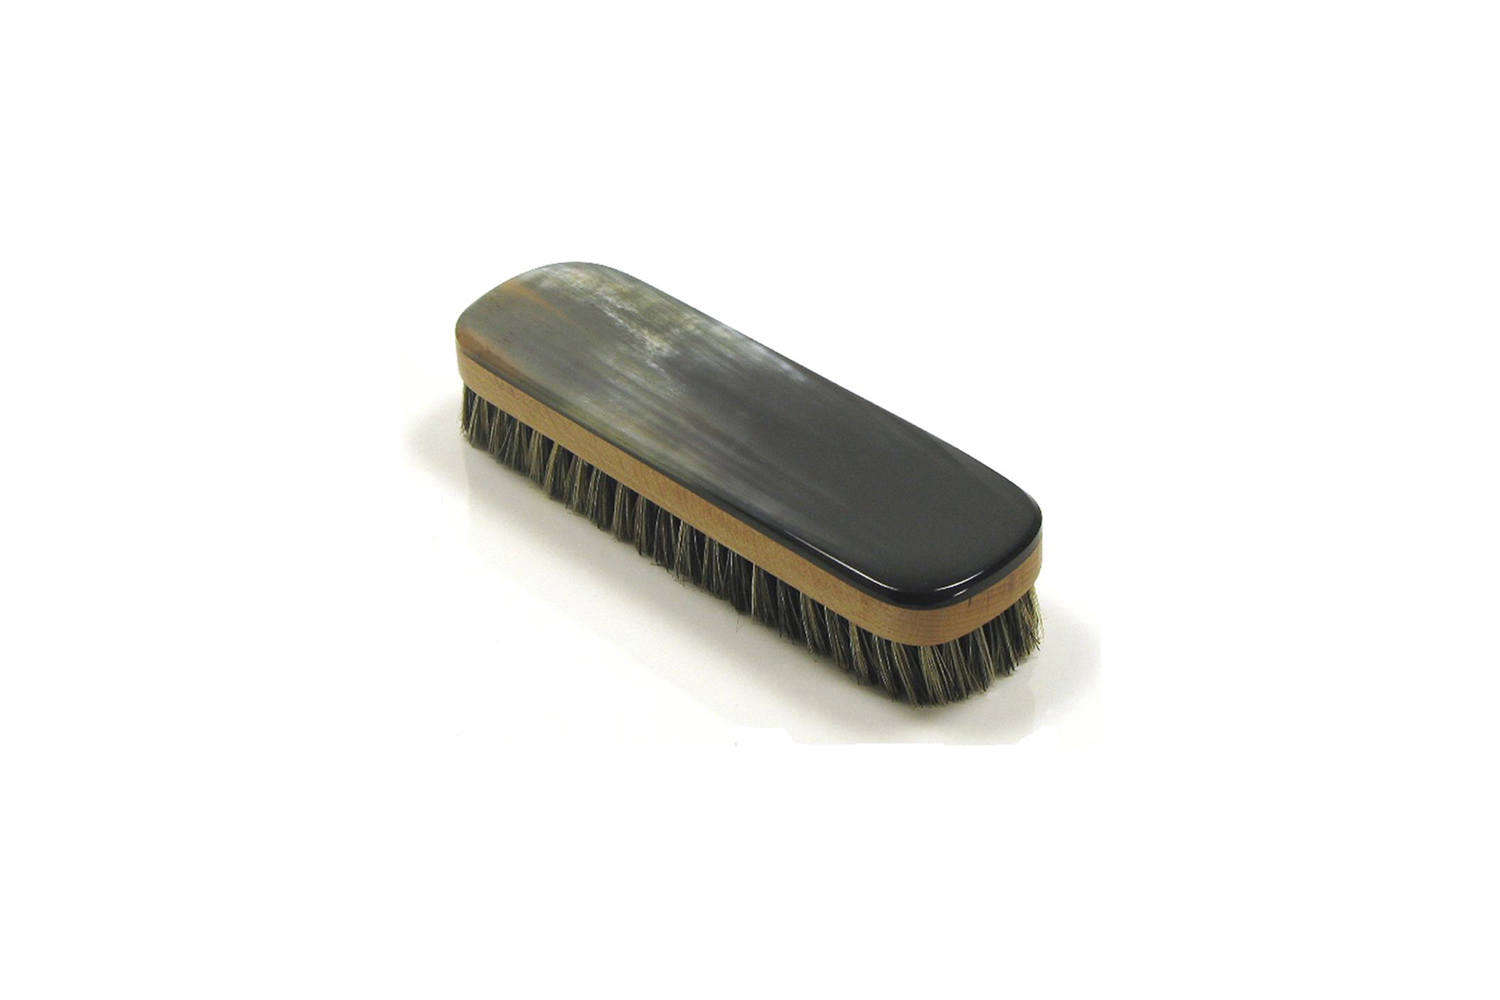 English Horn Clothes Brush from Butler's Closet